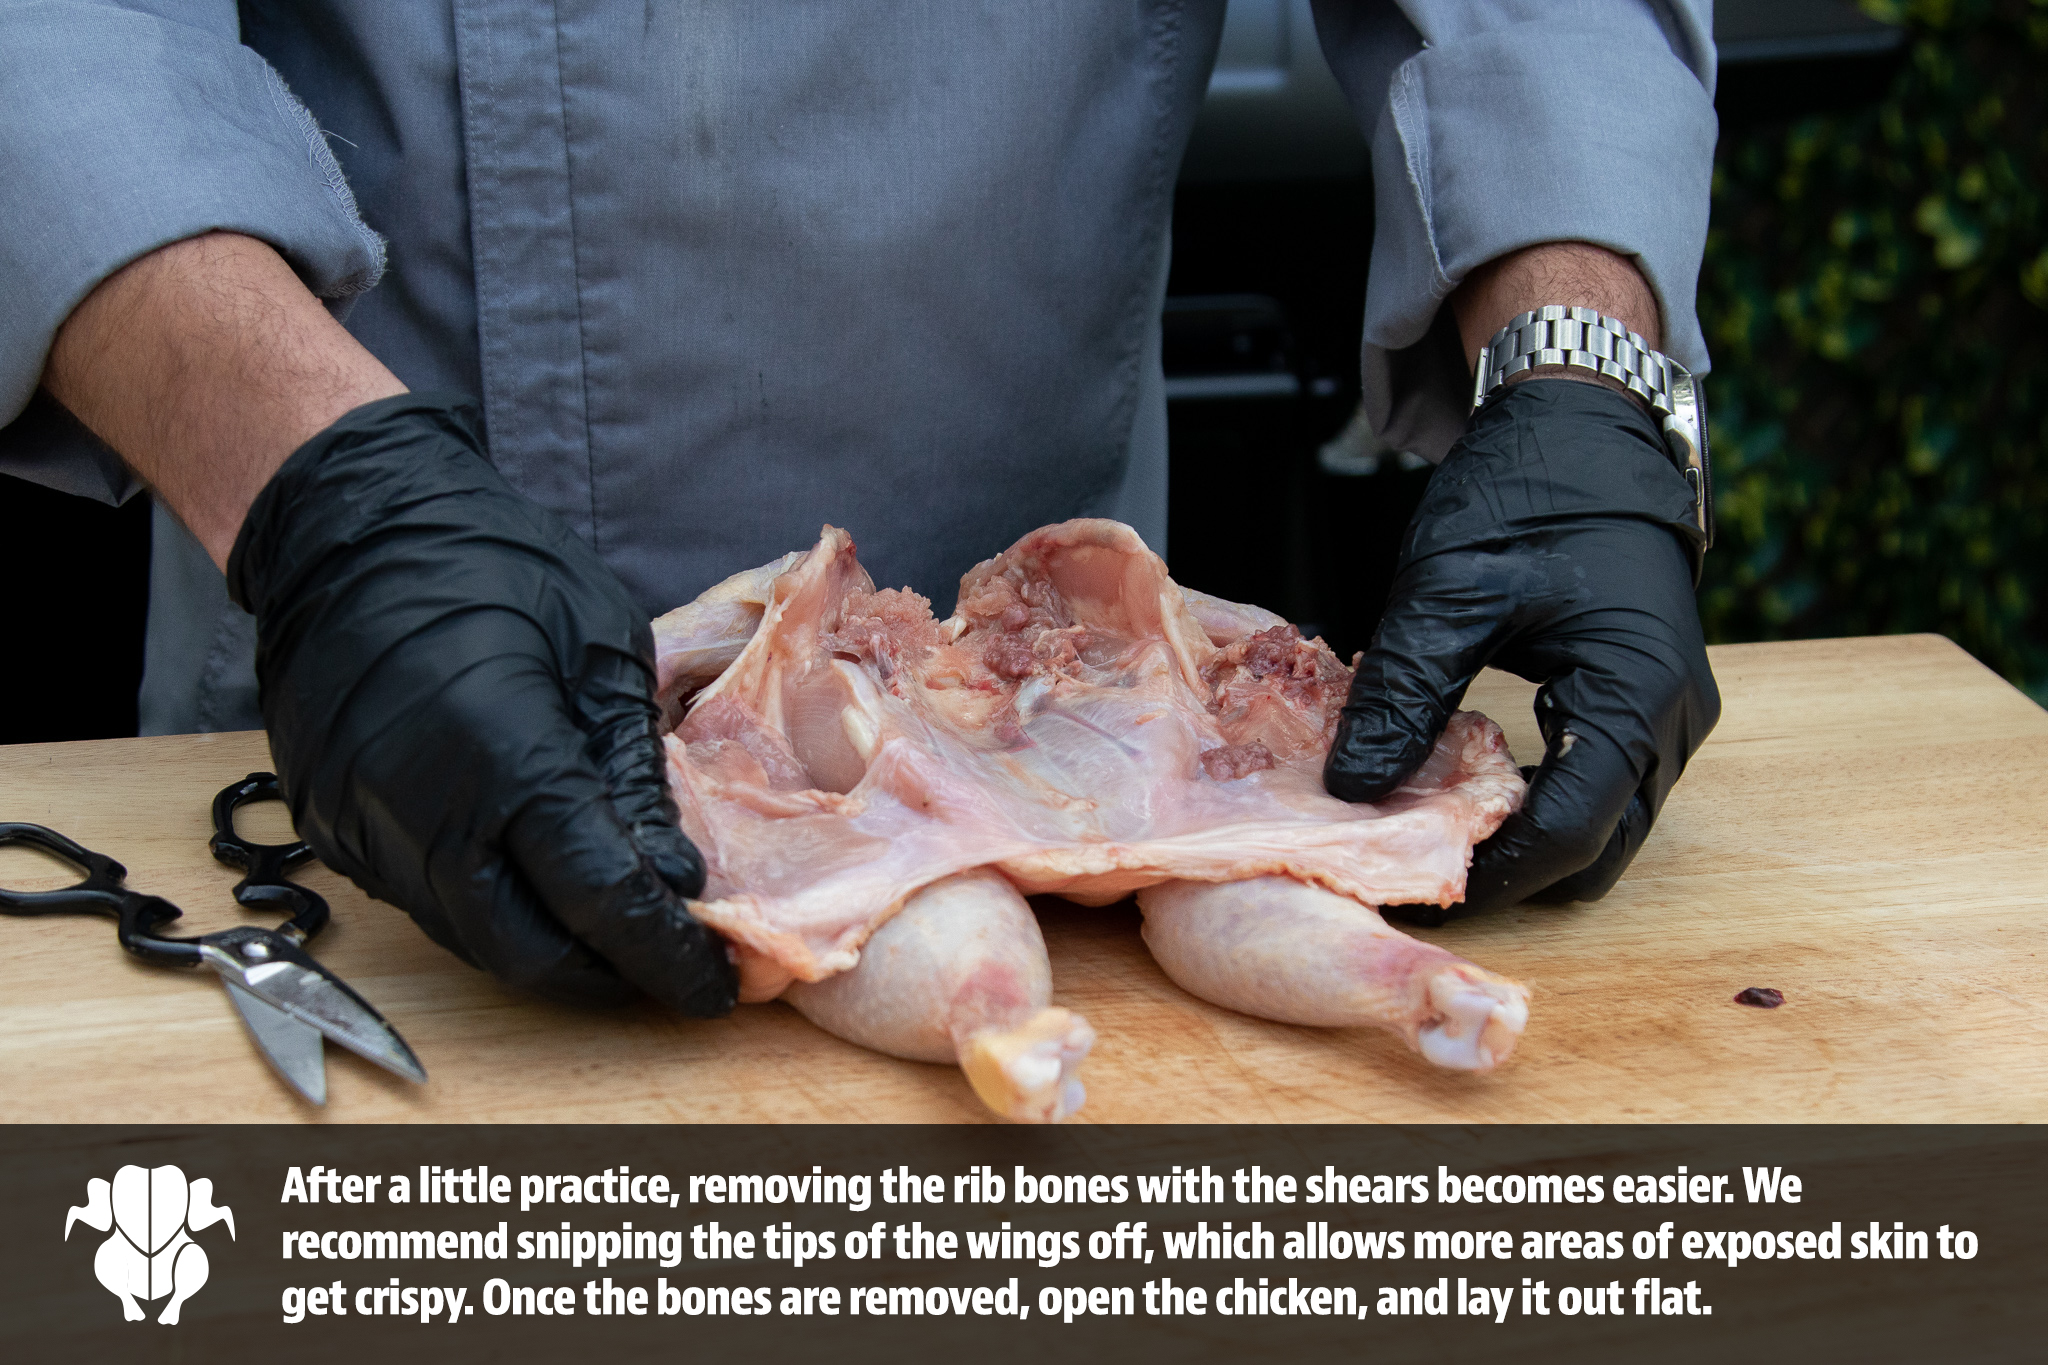 How To Butcher a Chicken With a Pair of Scissors